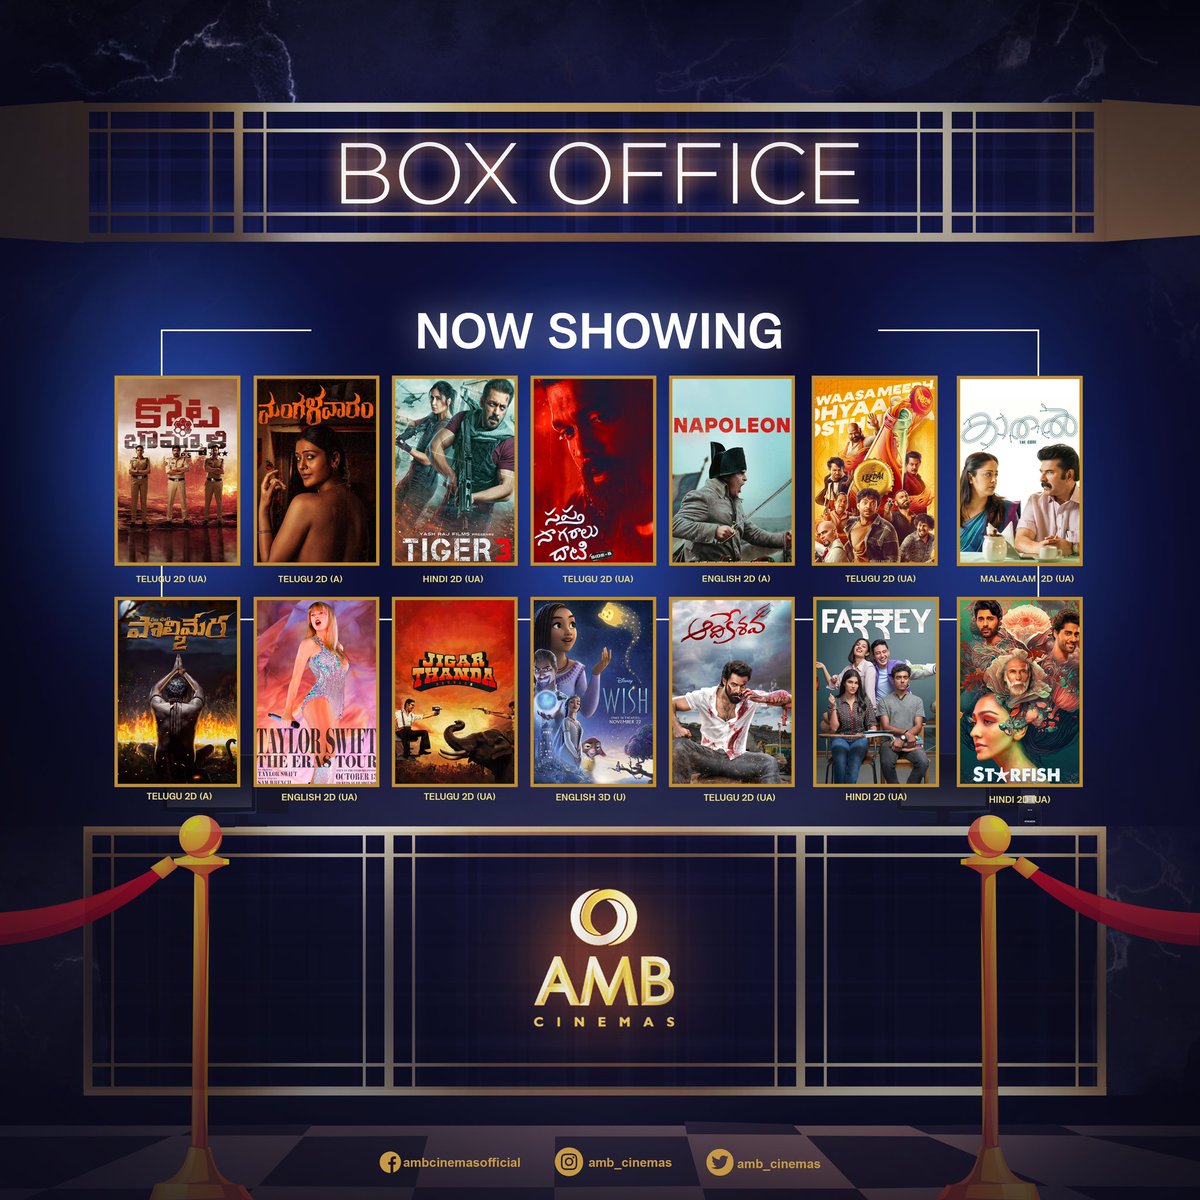 Lights, sound, AMBtion! 💥

Immerse yourself in the audio-visual spectacle at #AMBCinemas. Elevate your movie experience ❤️

#NowShowing 

#Aadikeshava #KotabommaliPS #Farrey #StarFish #KaathalTheCore #Wish  #MadhaveMadhusudana #Napoleon #Mangalavaaram 
#Tiger3 #SSDSideB